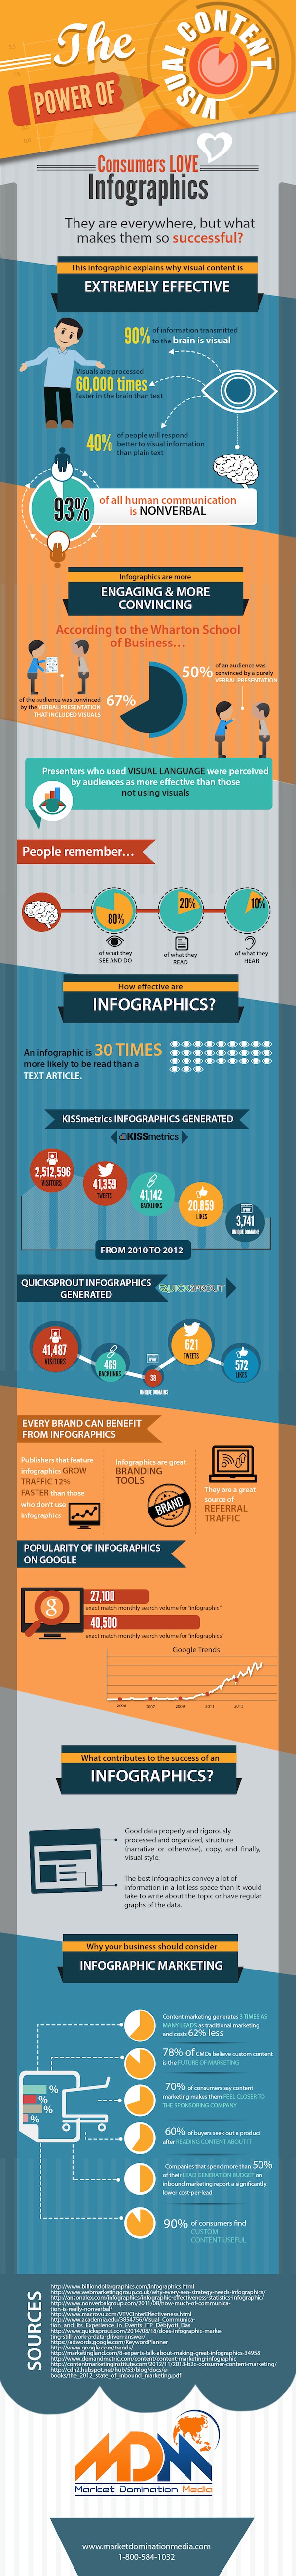 Visual Content Marketing Infographic